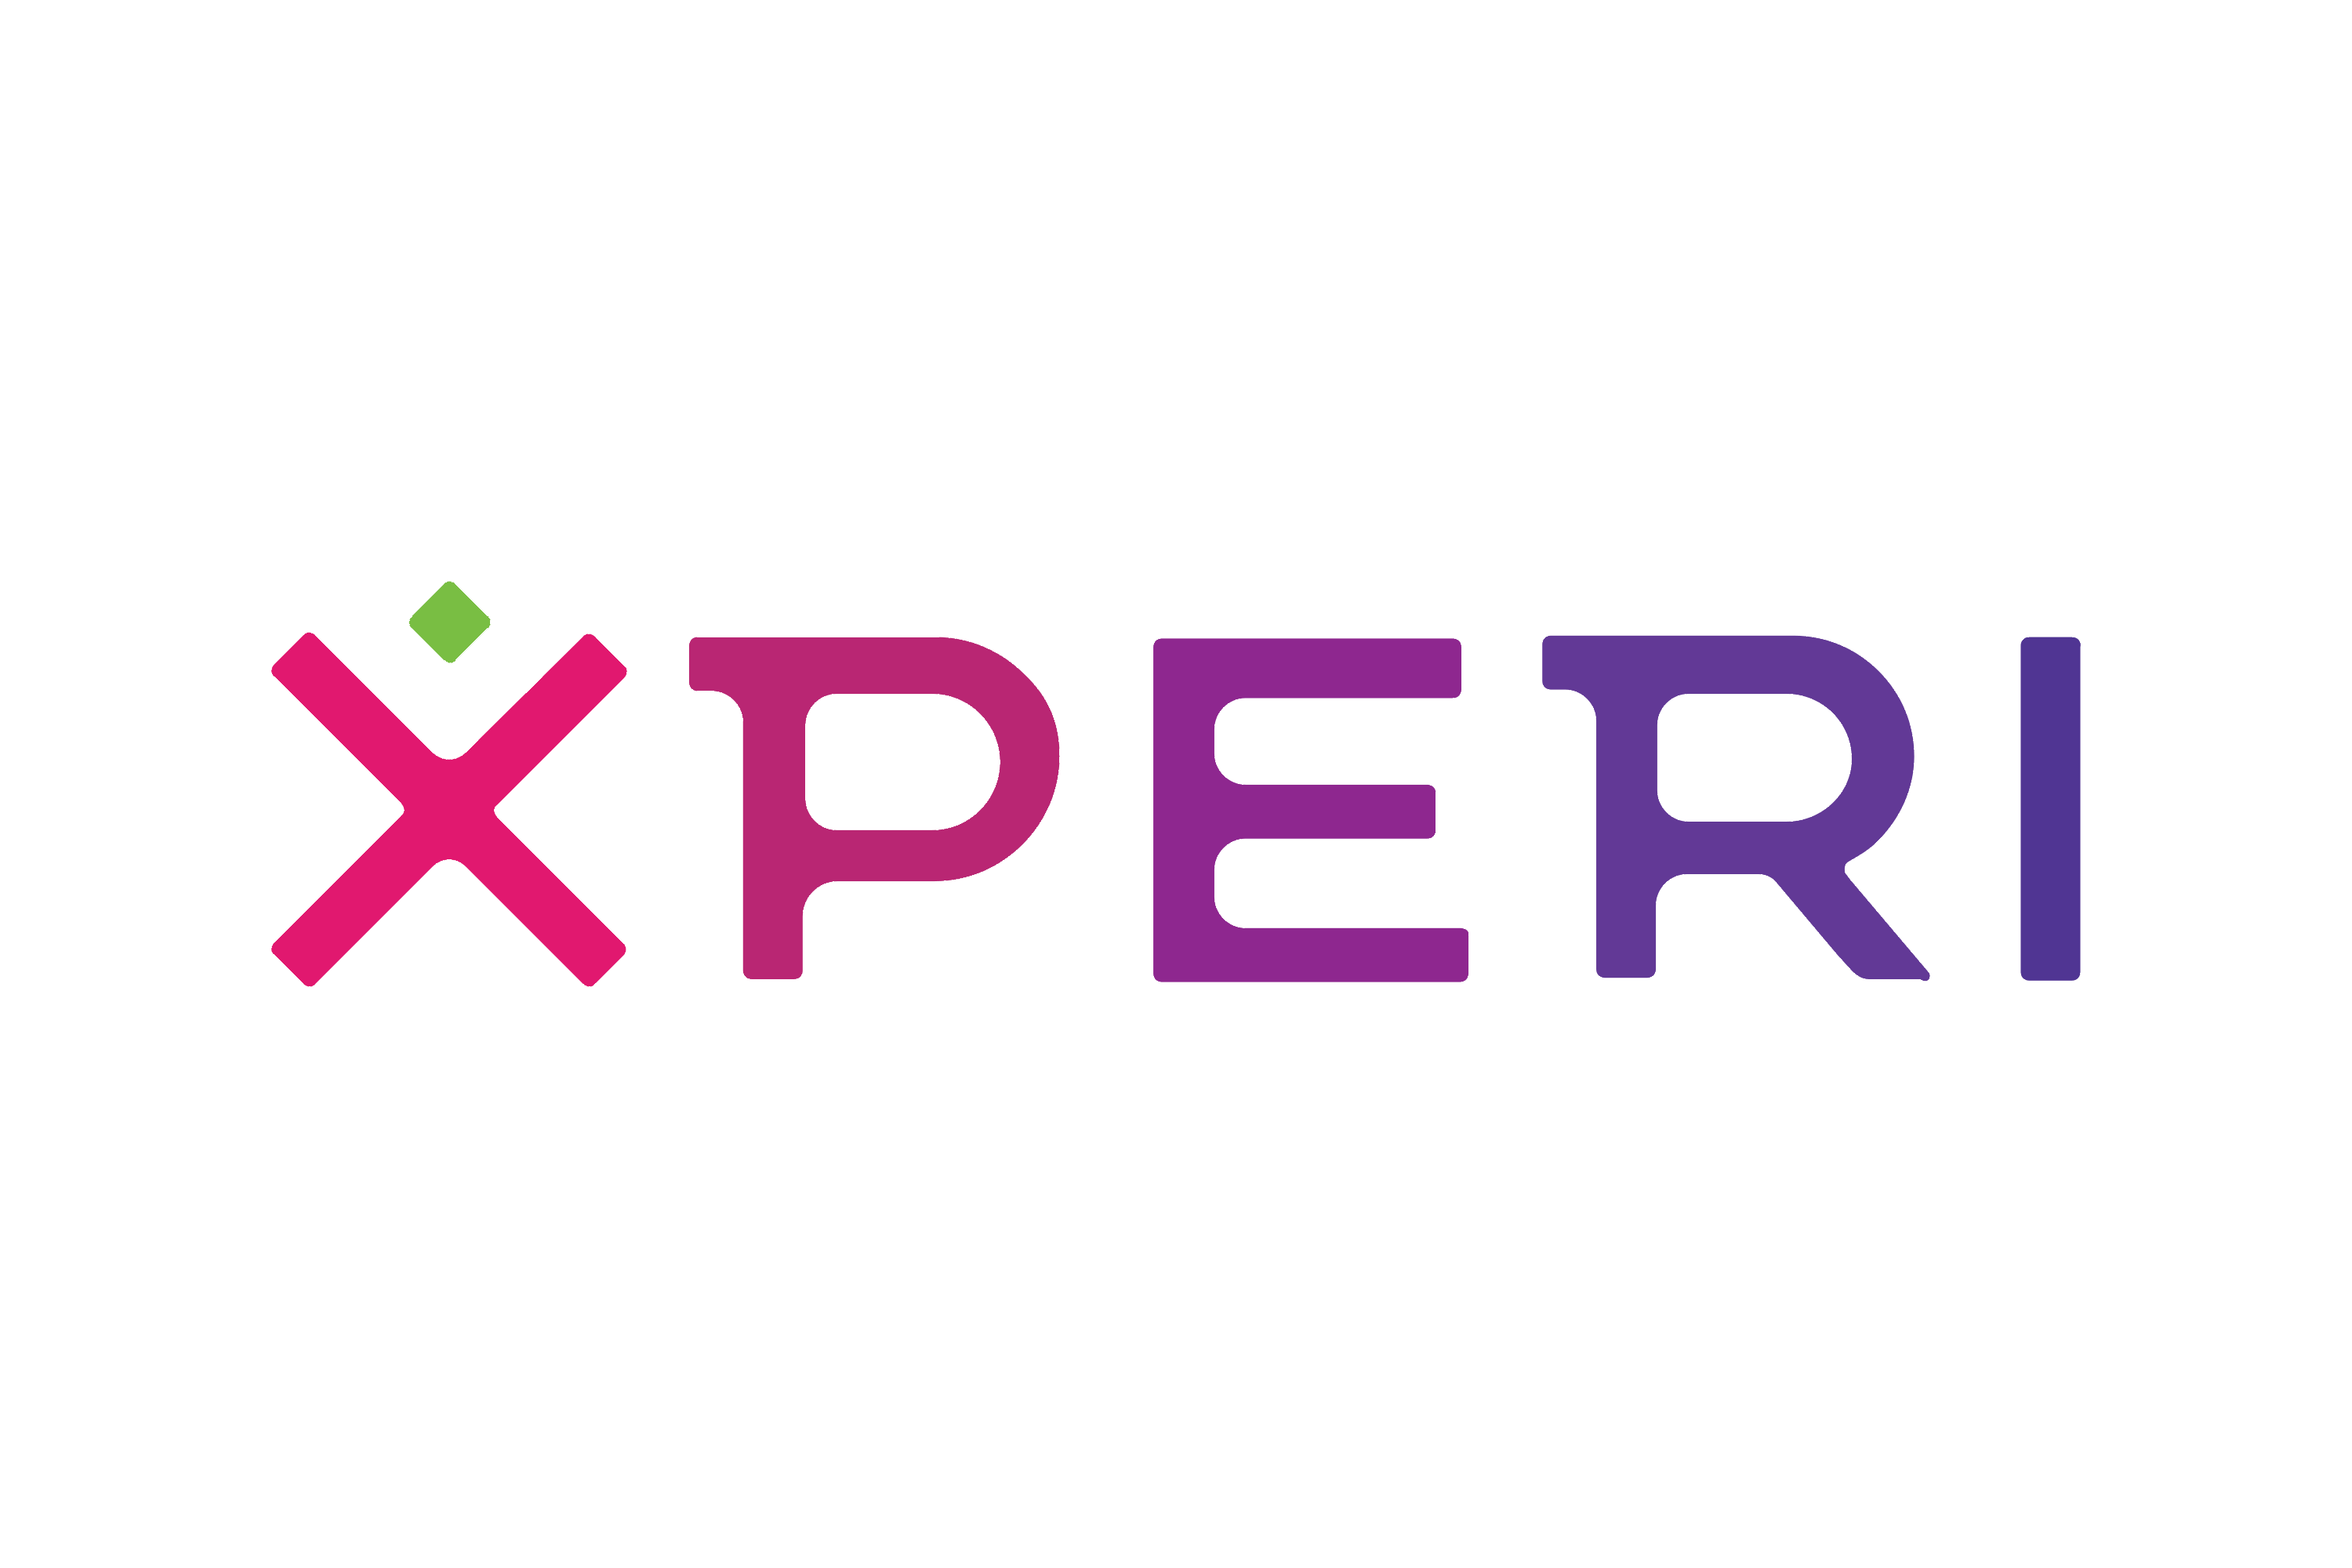 xperi is enreap's client. Read how enreap helped xperi to get desired results